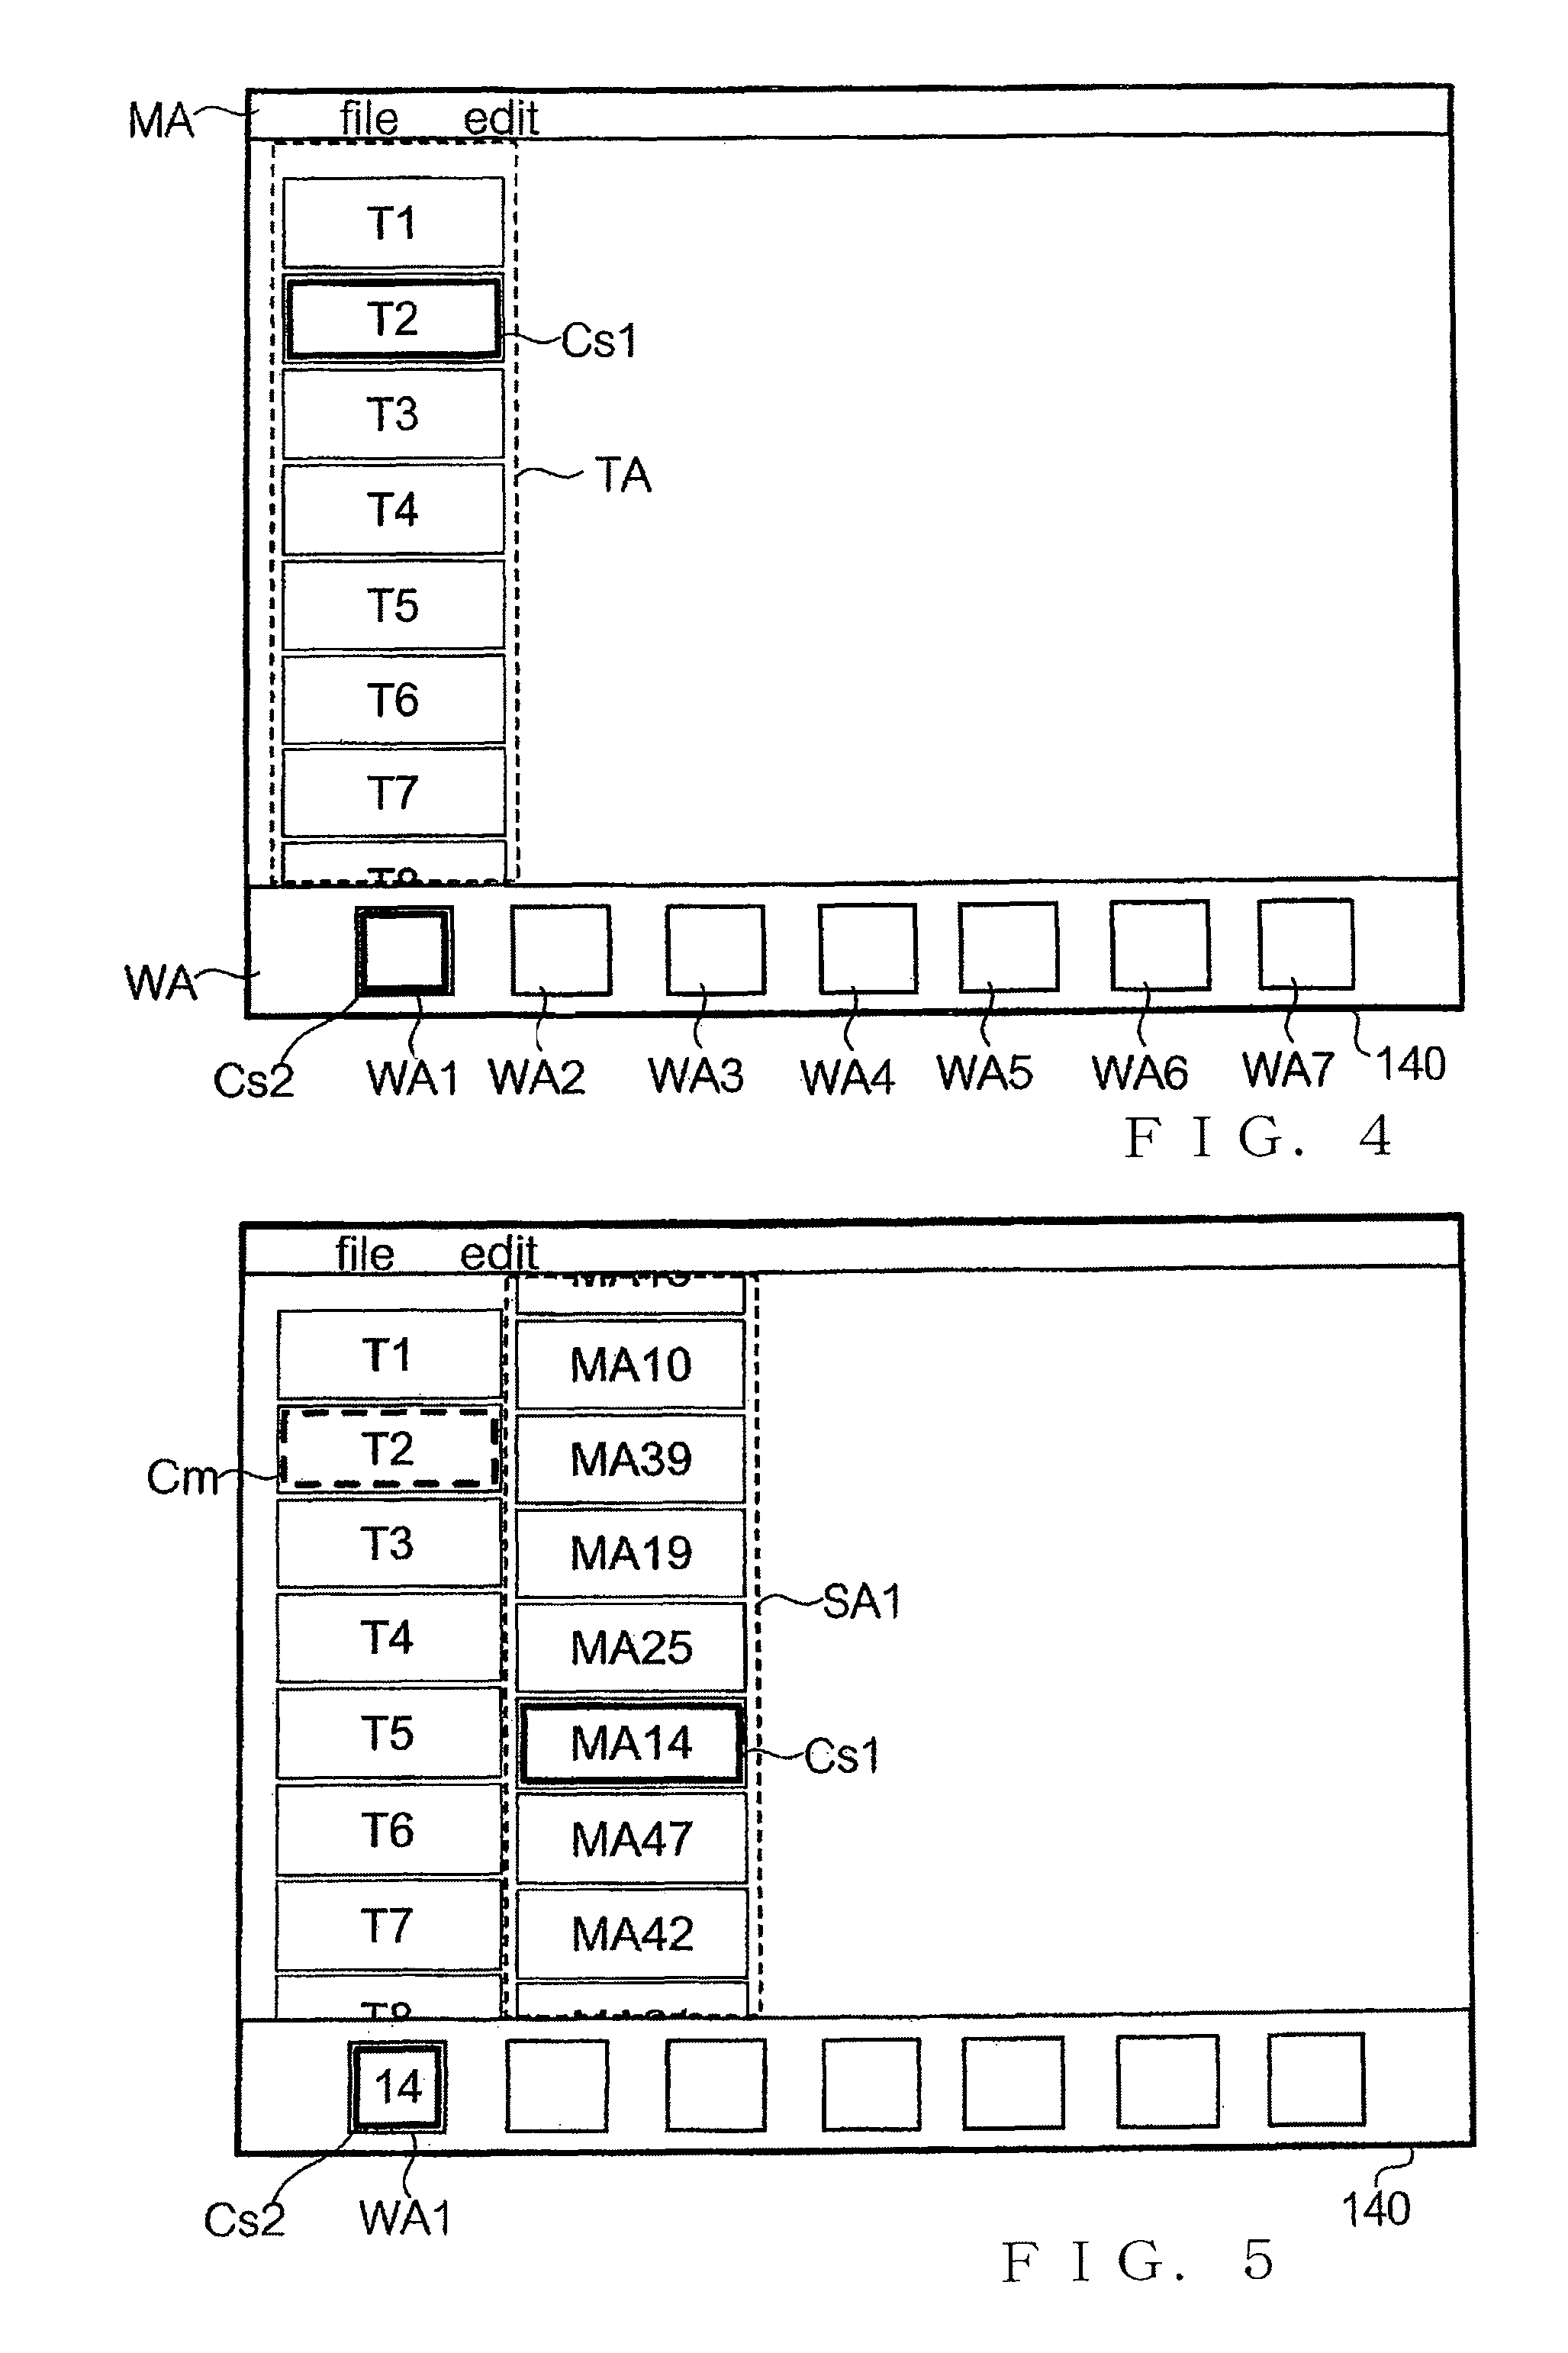 Tone data search apparatus and method